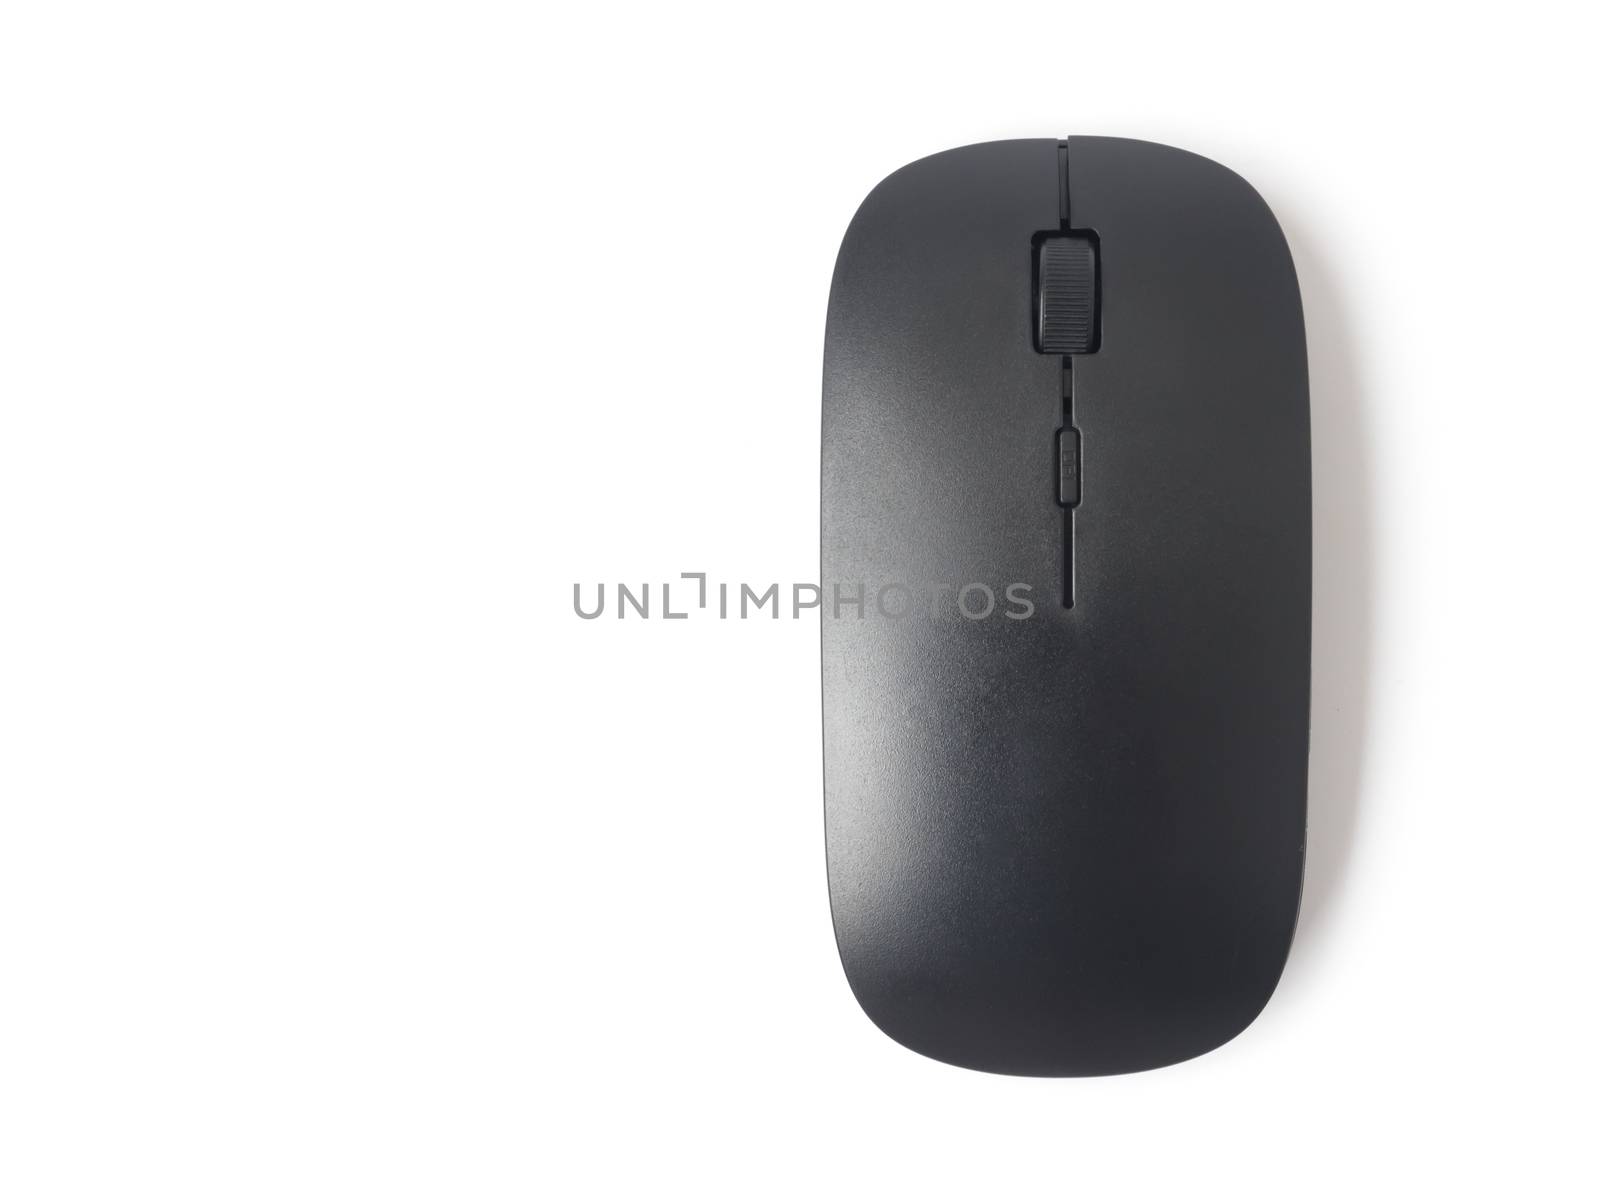 Black wireless computer mouse on white background, technology concept